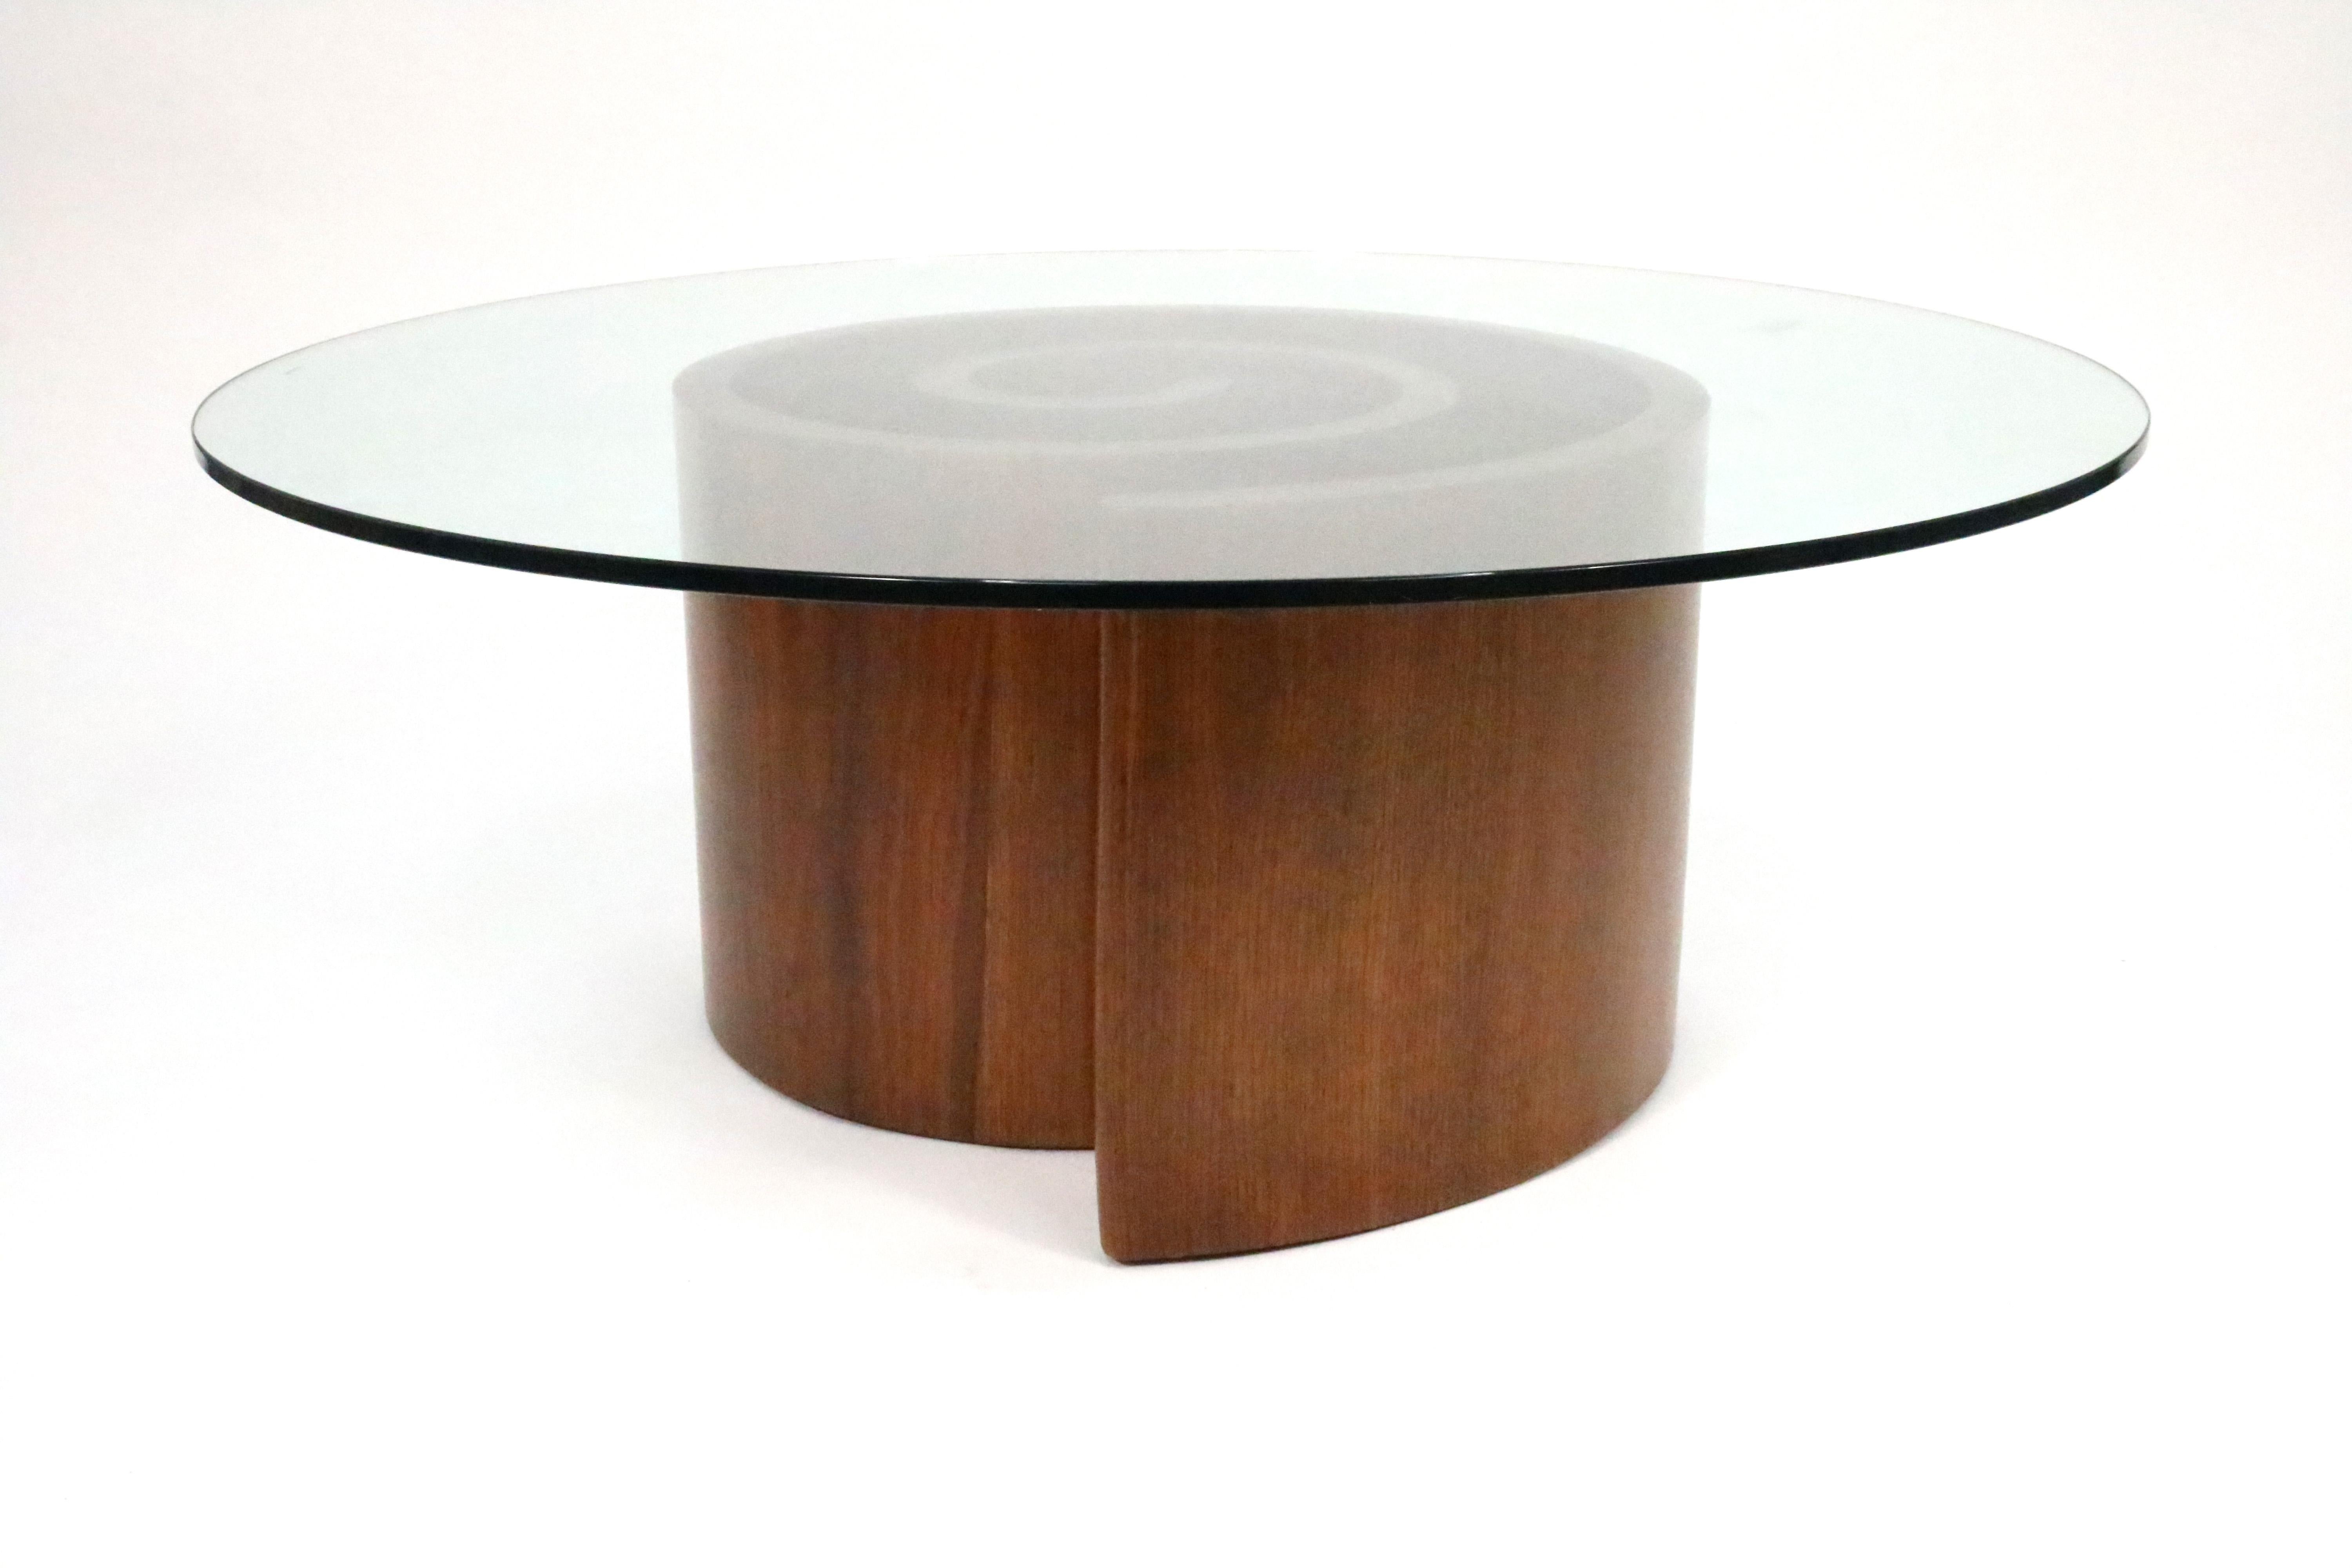 Vladimir Kagan Snail Coffee Table in Walnut with Round Glass Top 1